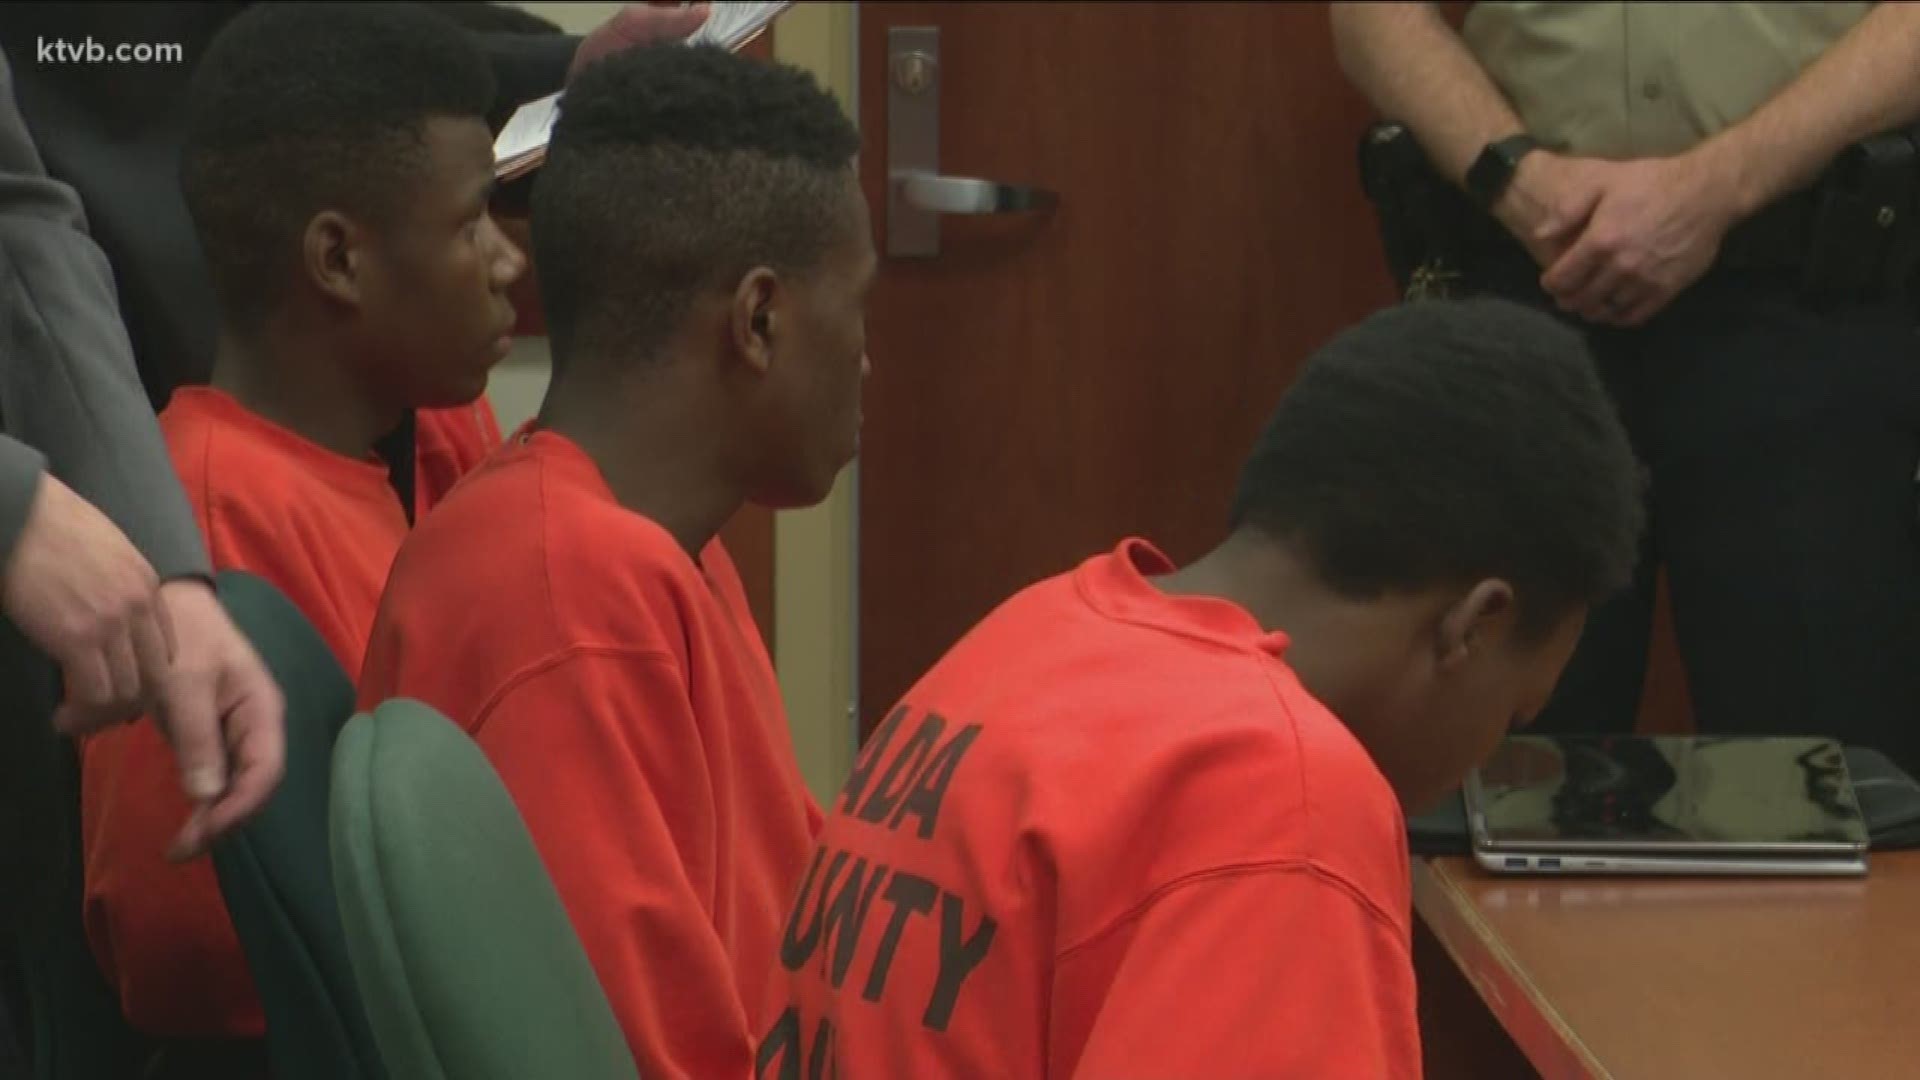 Four teens charged in the case remain in jail.